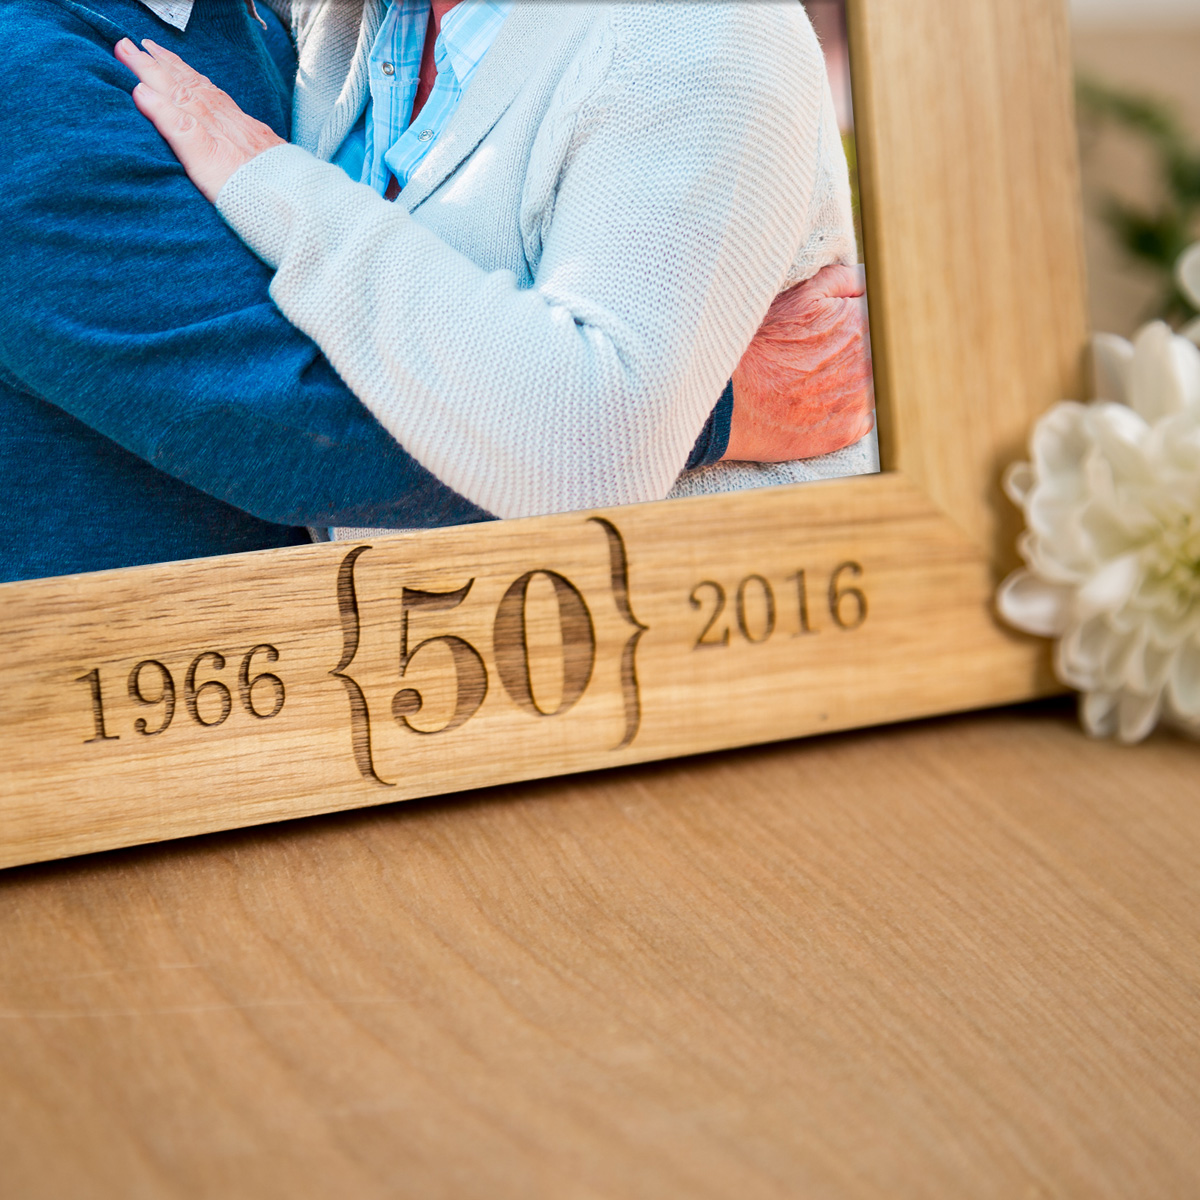 Personalised Wooden Photo Frame - 50th Anniversary